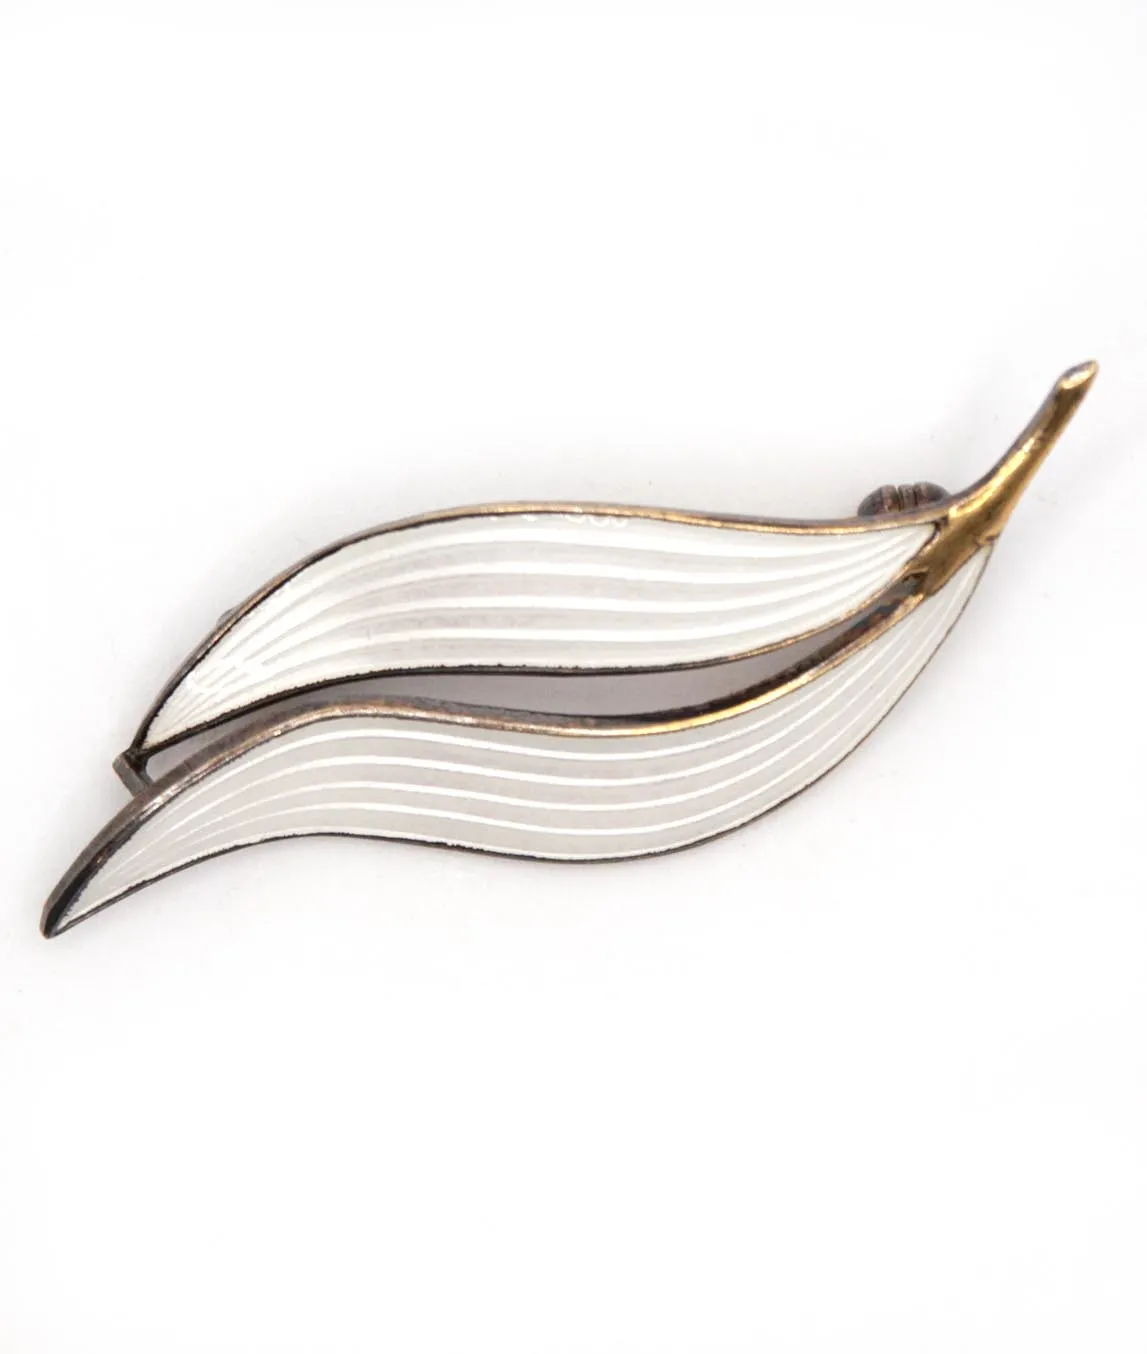 Aksel Holmsen double leaf brooch with white enamel on gilt silver